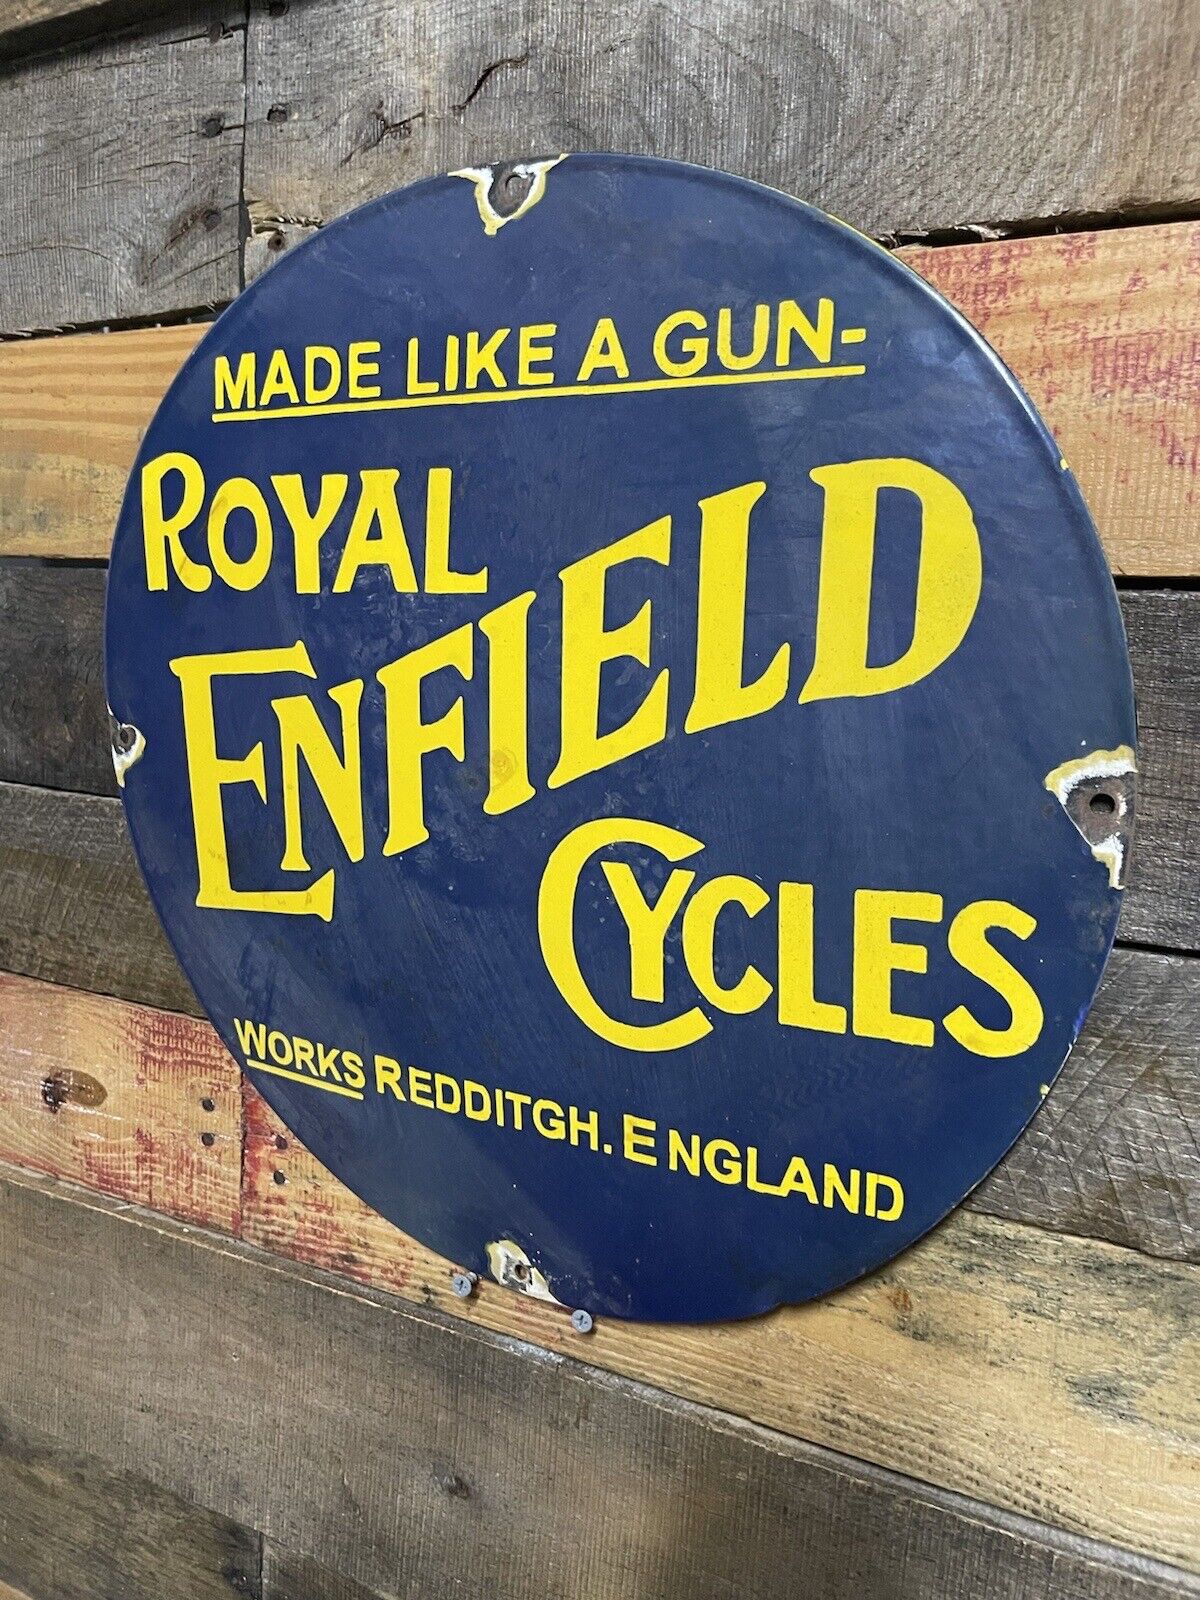 VINTAGE ROYAL ENFIELD PORCELAIN SIGN MADE IN ENGLAND LIKE A GUN MOTORCYCLE CYCLE